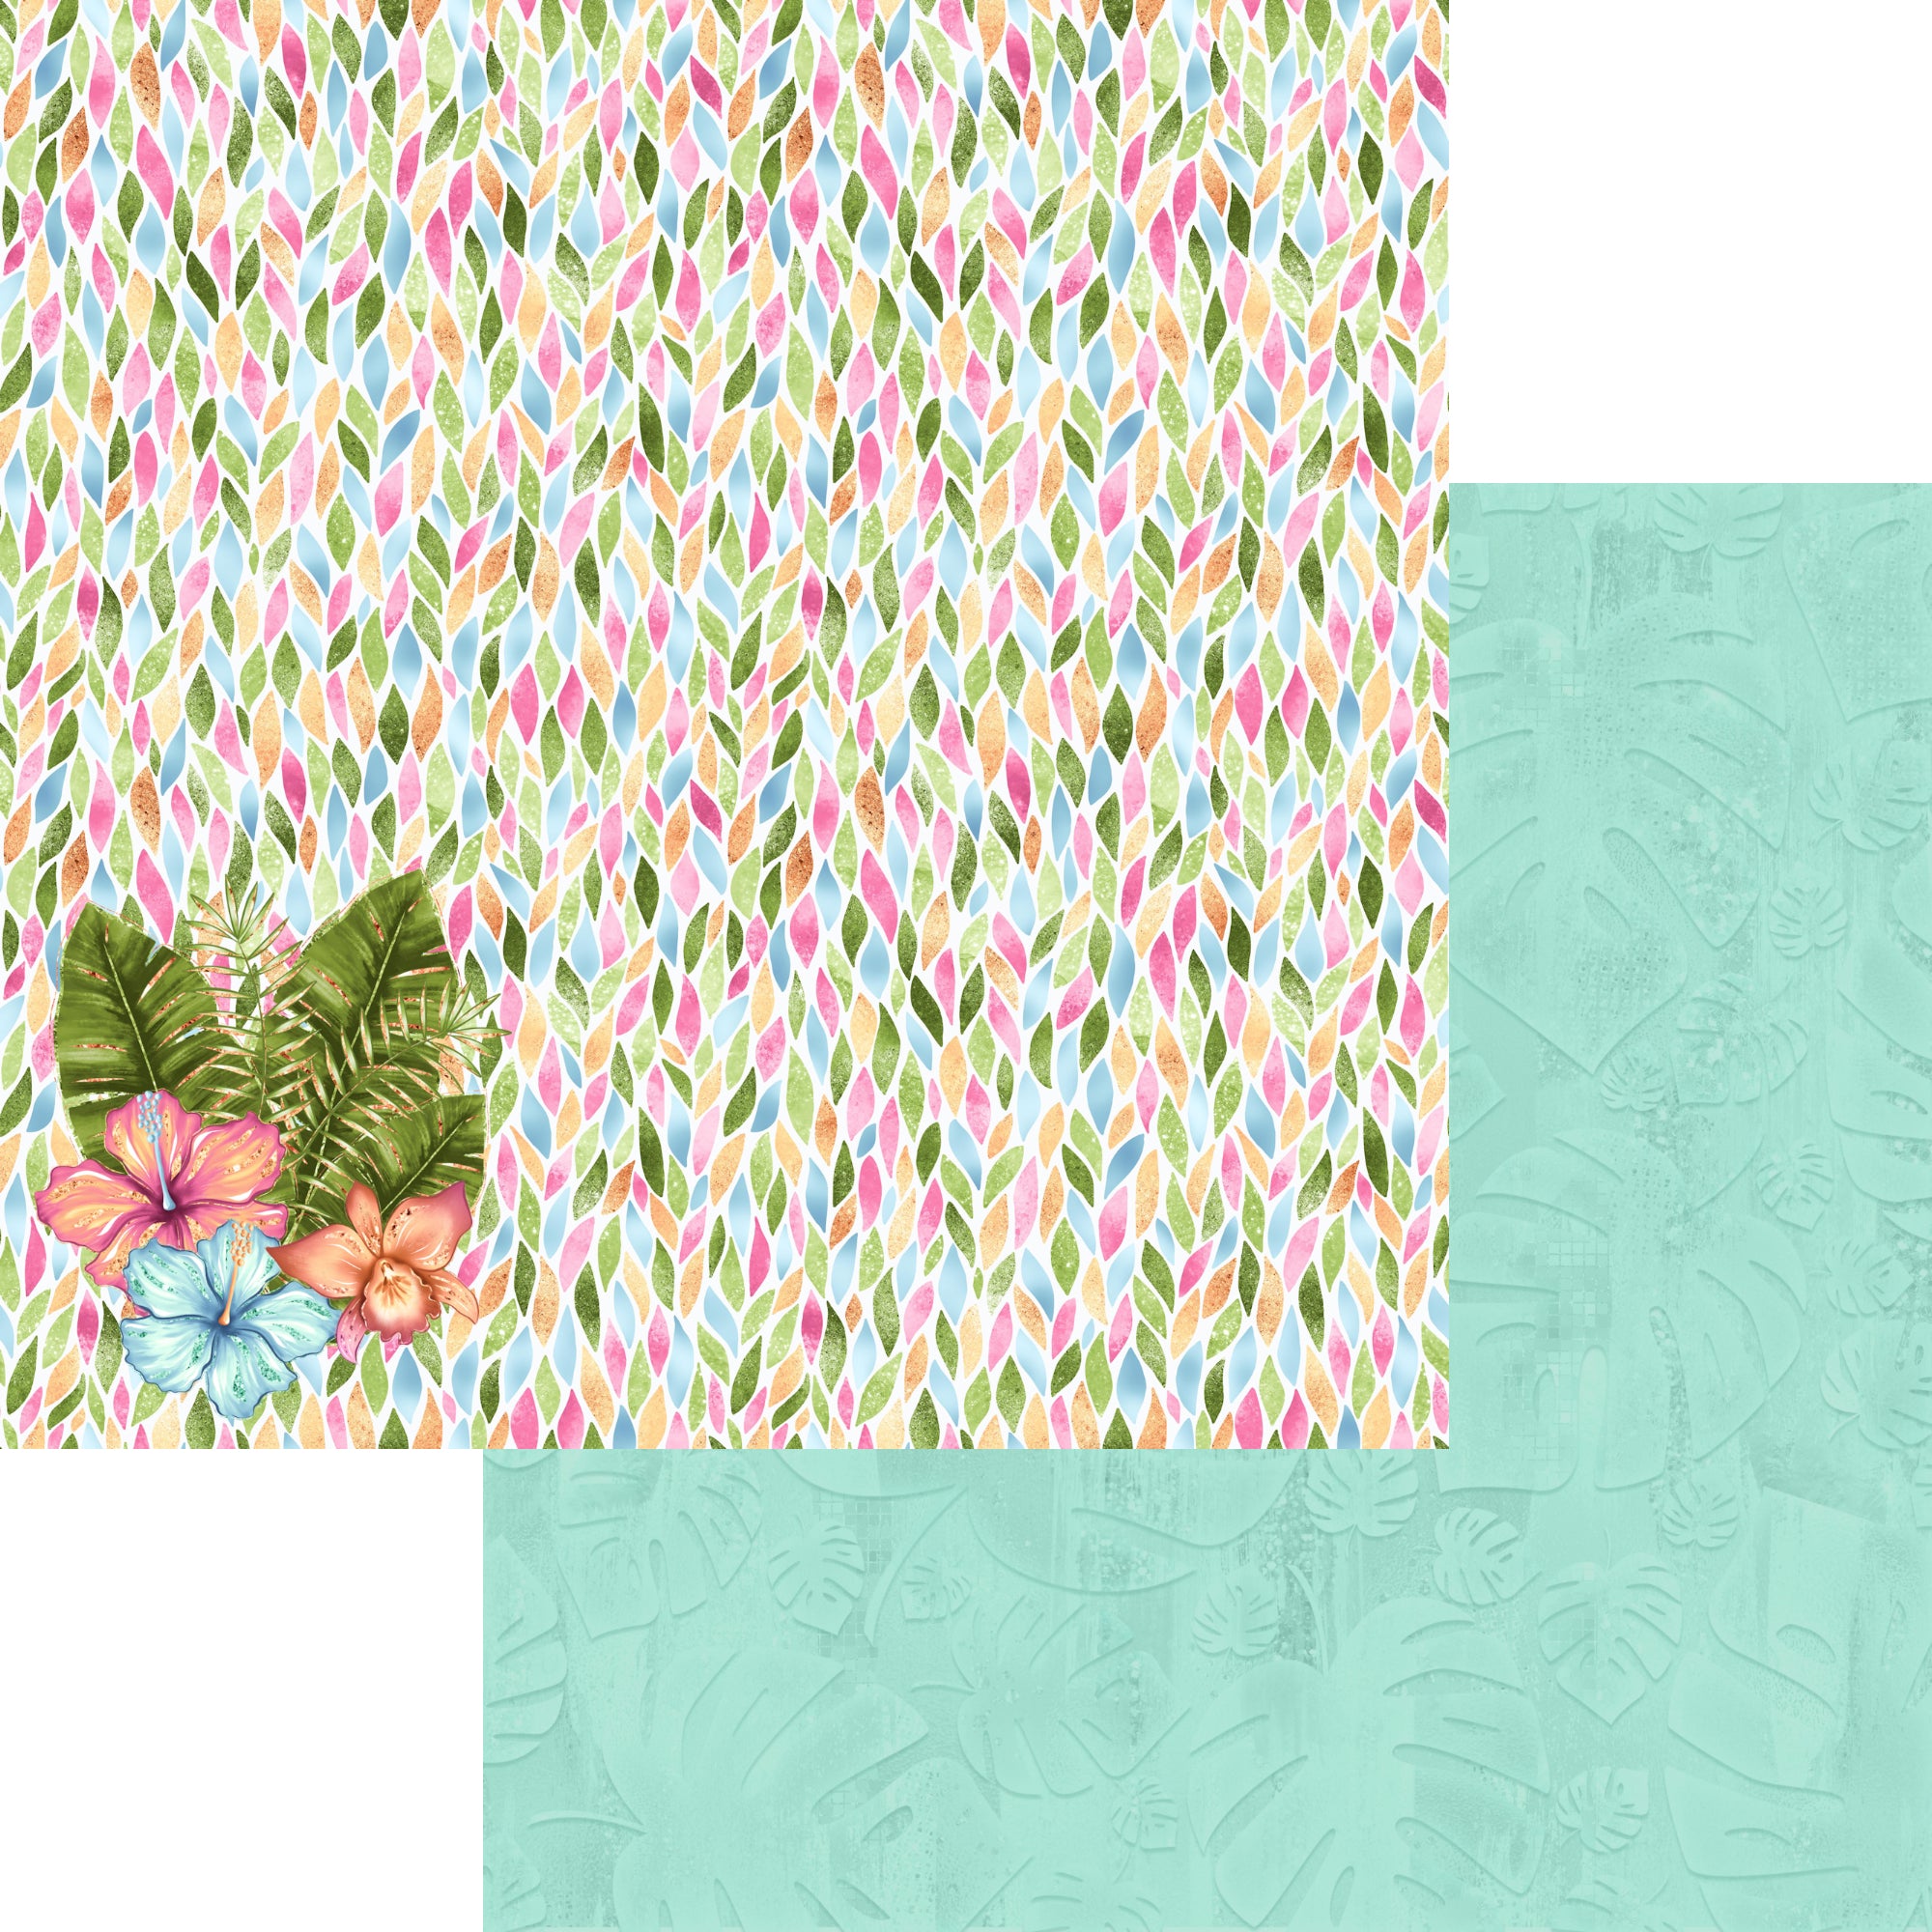 Tropical Bliss 12 x 12 Scrapbook Paper & Embellishment Kit by SSC Designs